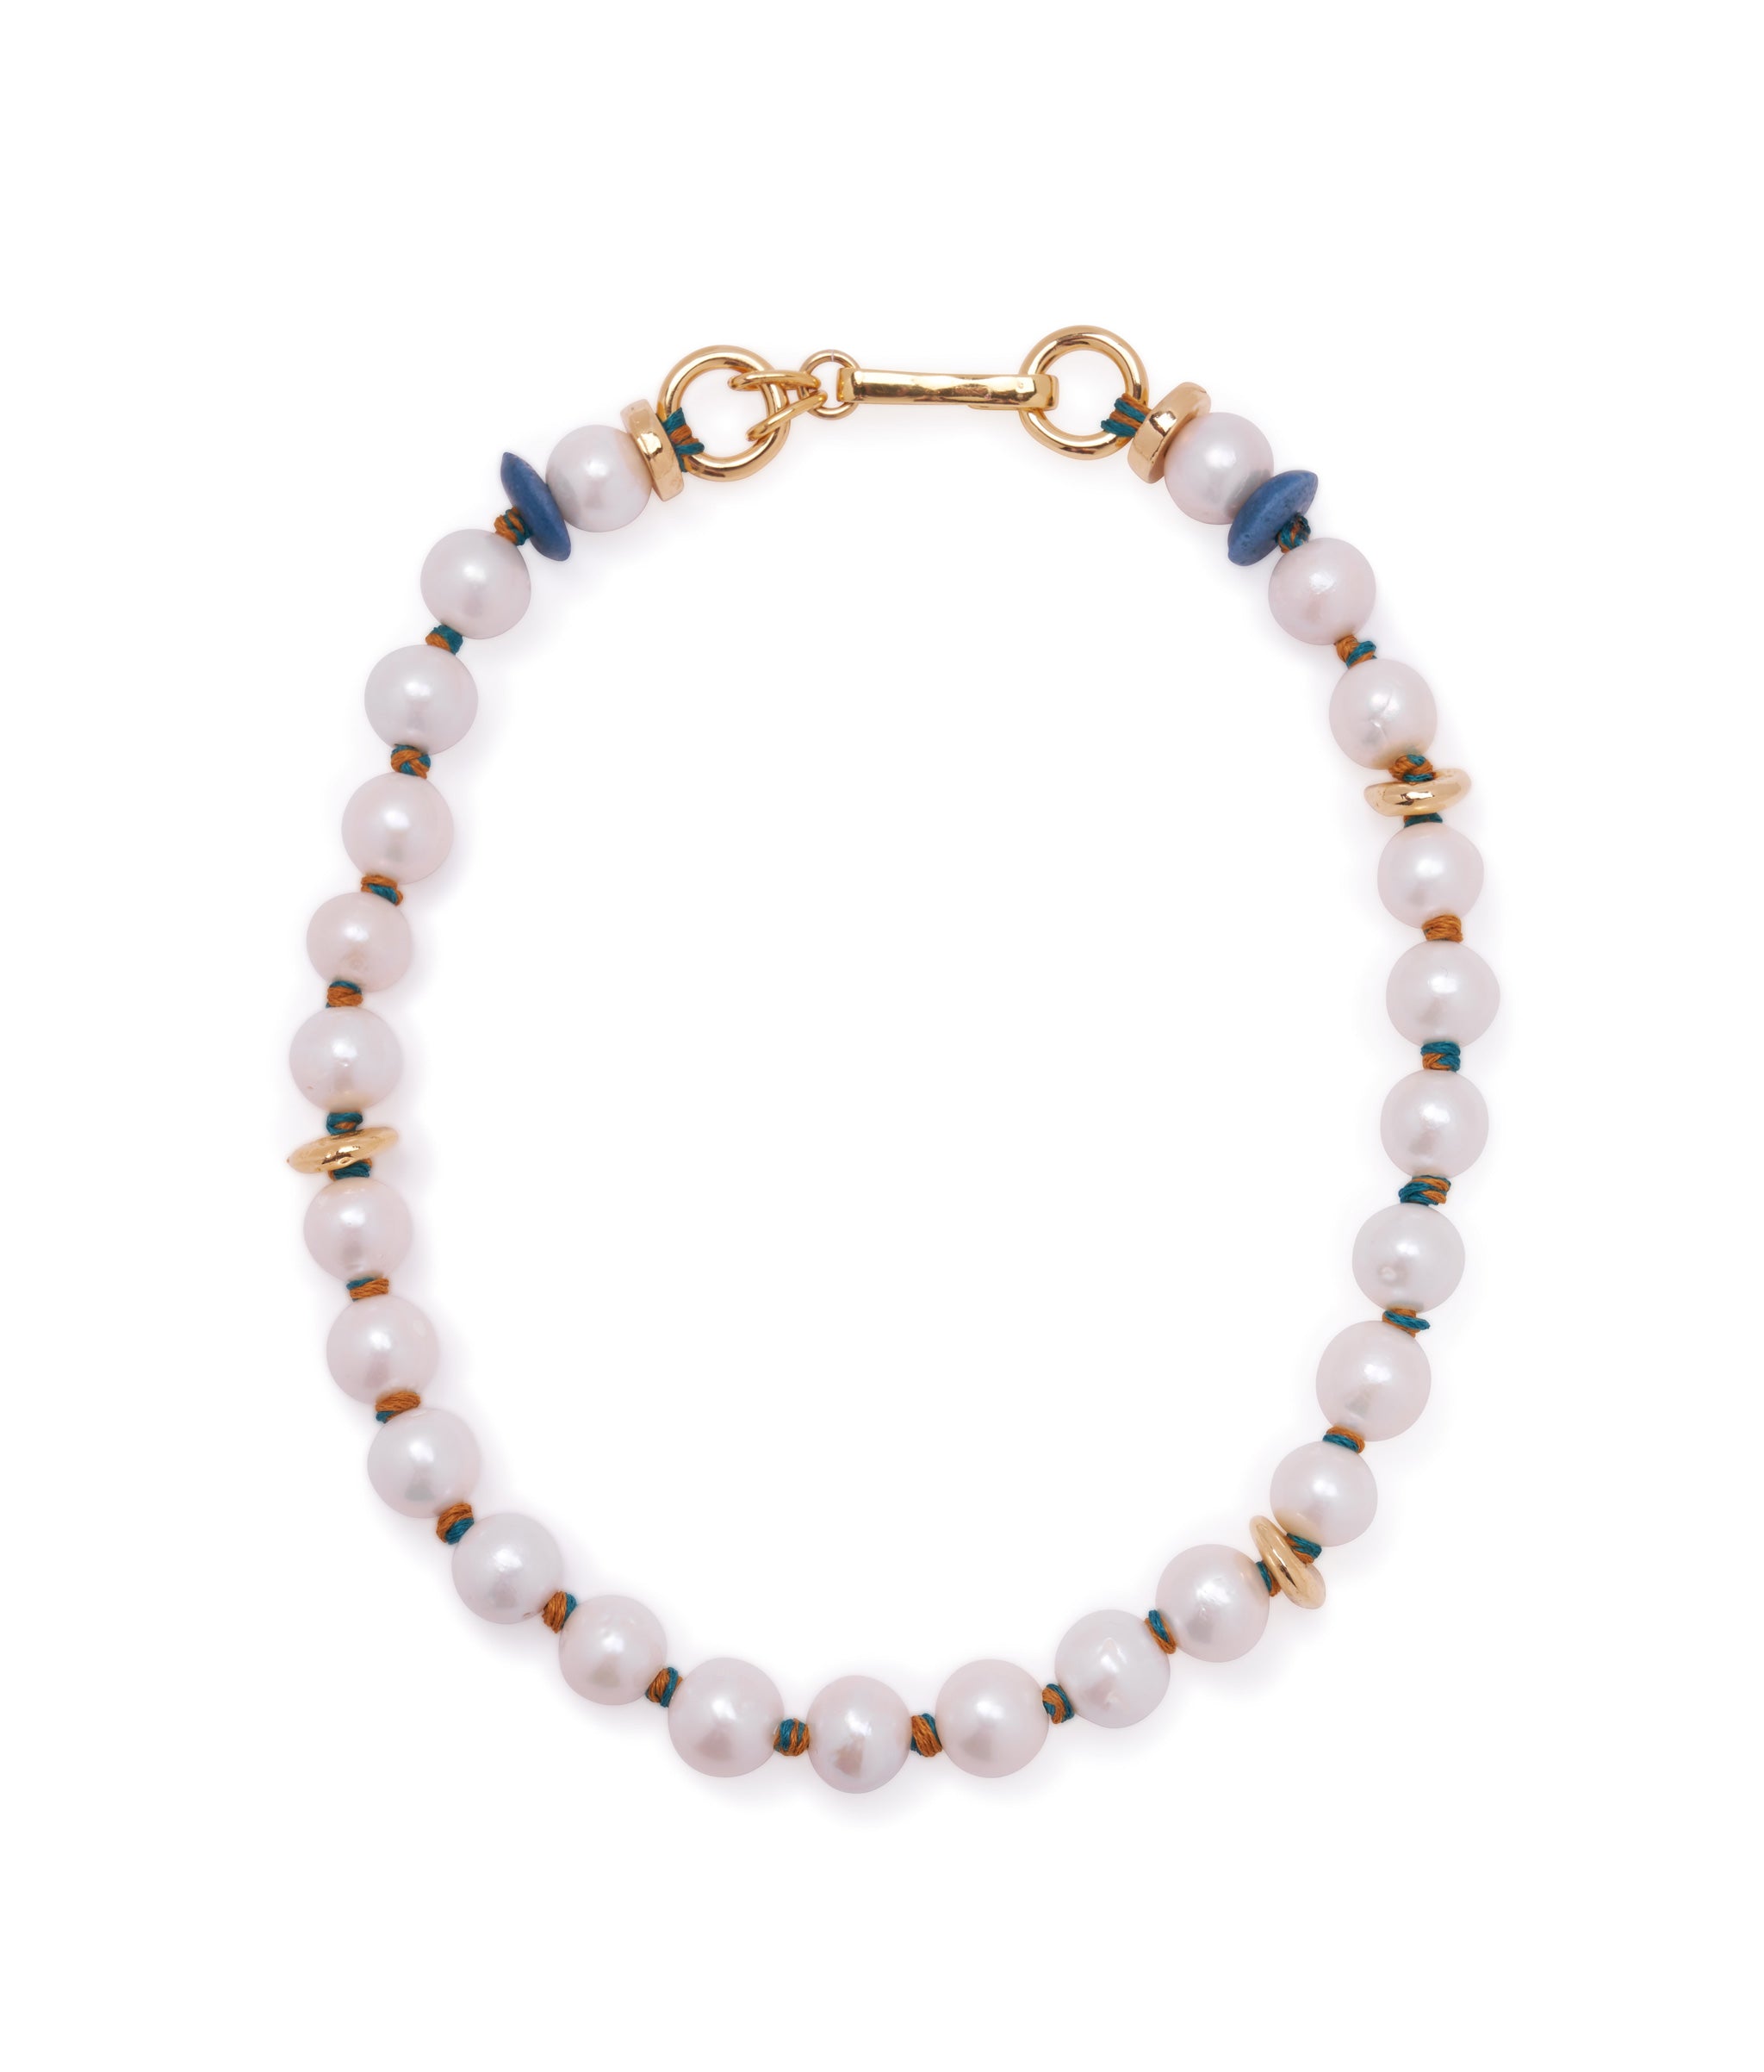 Pacifica Pearl Collar. Freshwater pearl necklace knotted with orange and blue thread, with gold-plated hook closure.Pacifica Pearl Collar. Pearl necklace with color-blocked cotton thread knotting and a gold-plated brass hook closure.